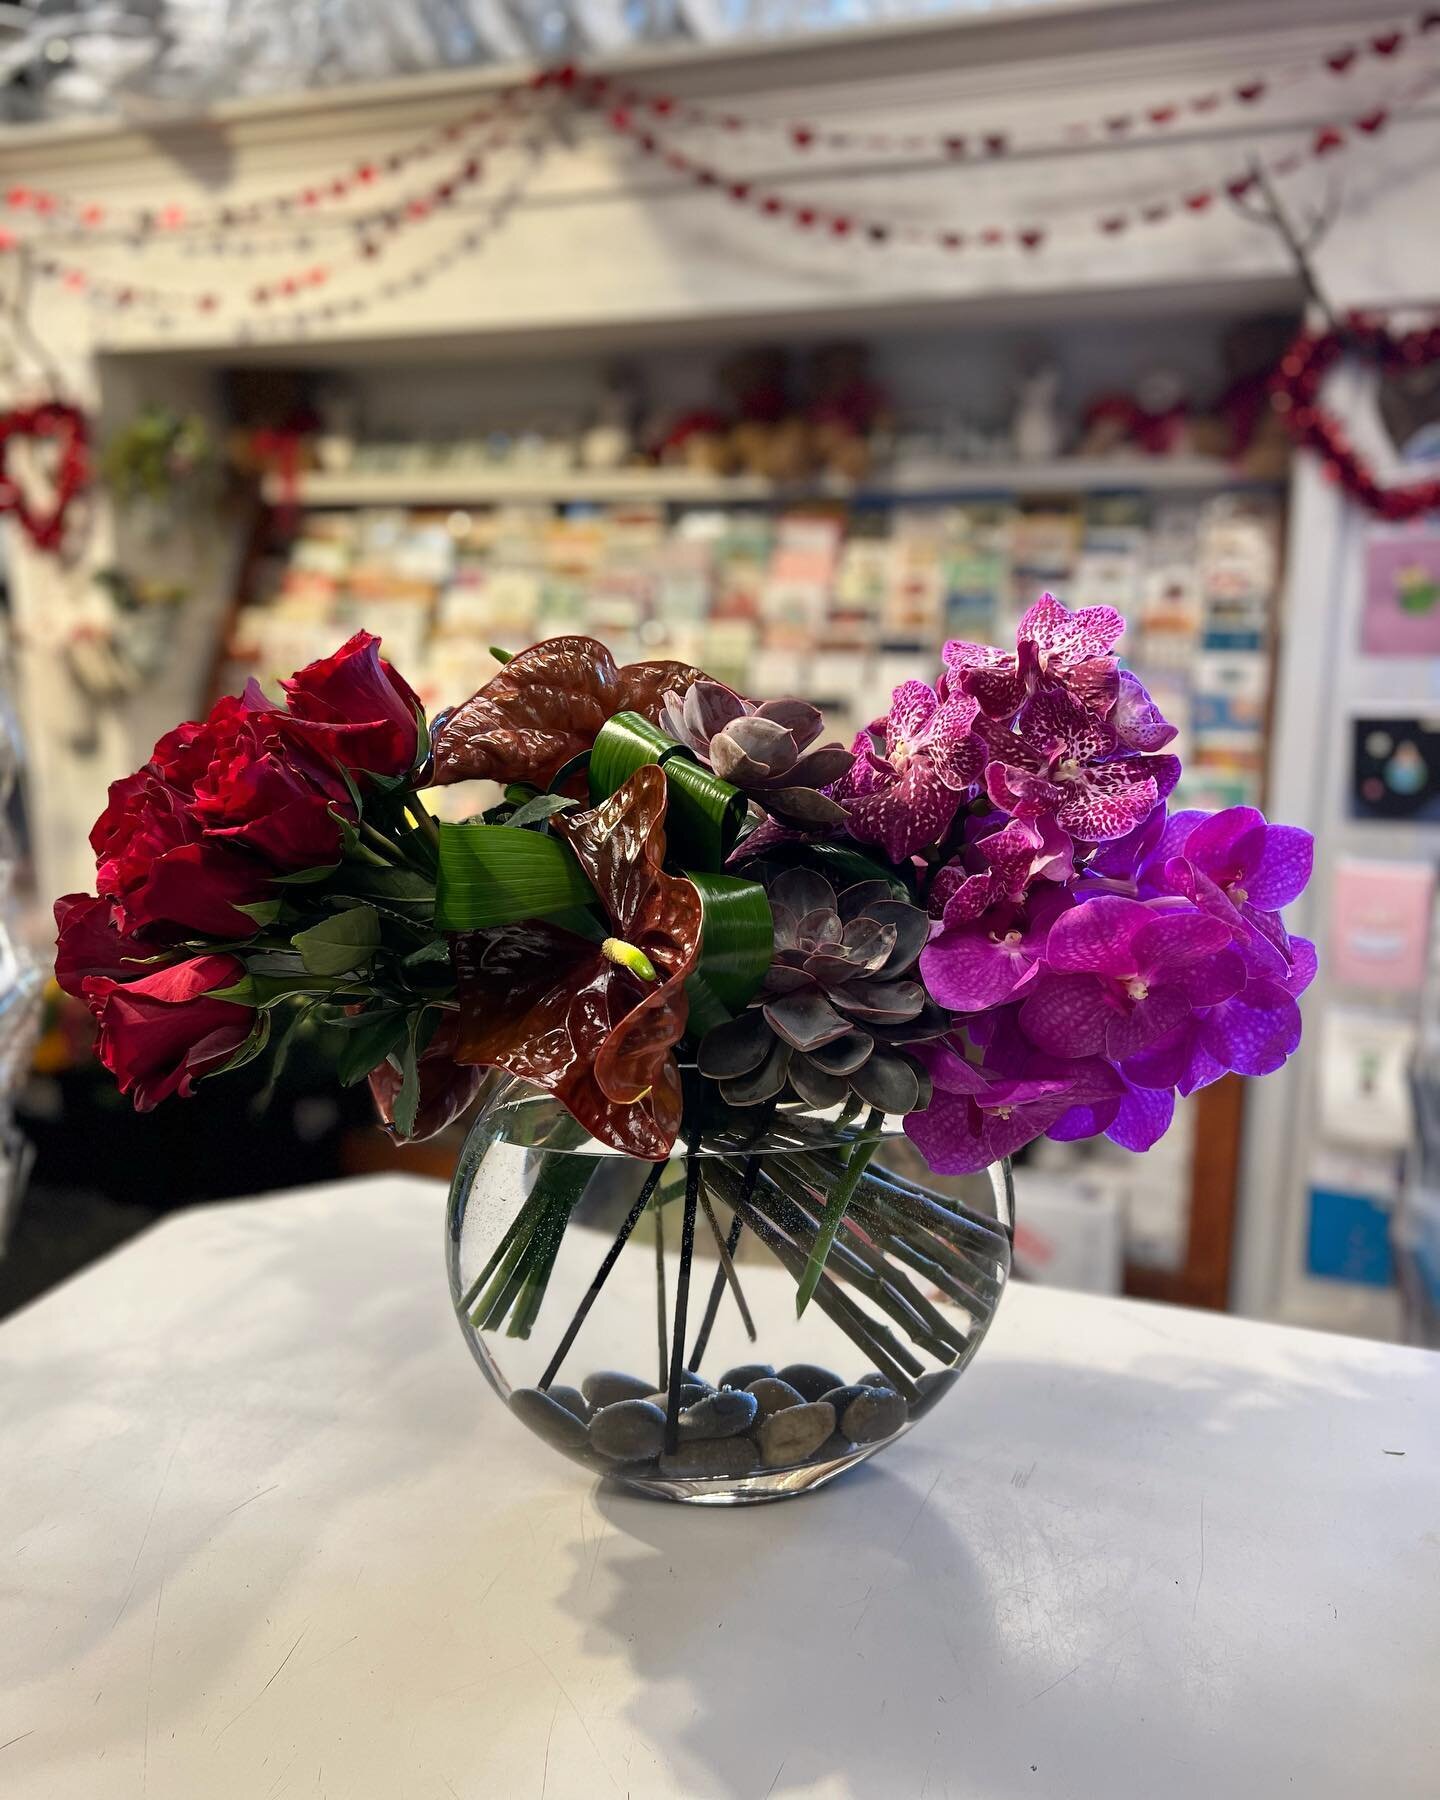 Happy Valentine&rsquo;s Week to all my flower friends out there! ❤️ May your flowers be fresh, your stamina strong, and your creativity abundant! 🌸
.
#valentinesflowers #vday #valentinesday #minneapolisflorist #flowershop #flowerlovers #plantlover #